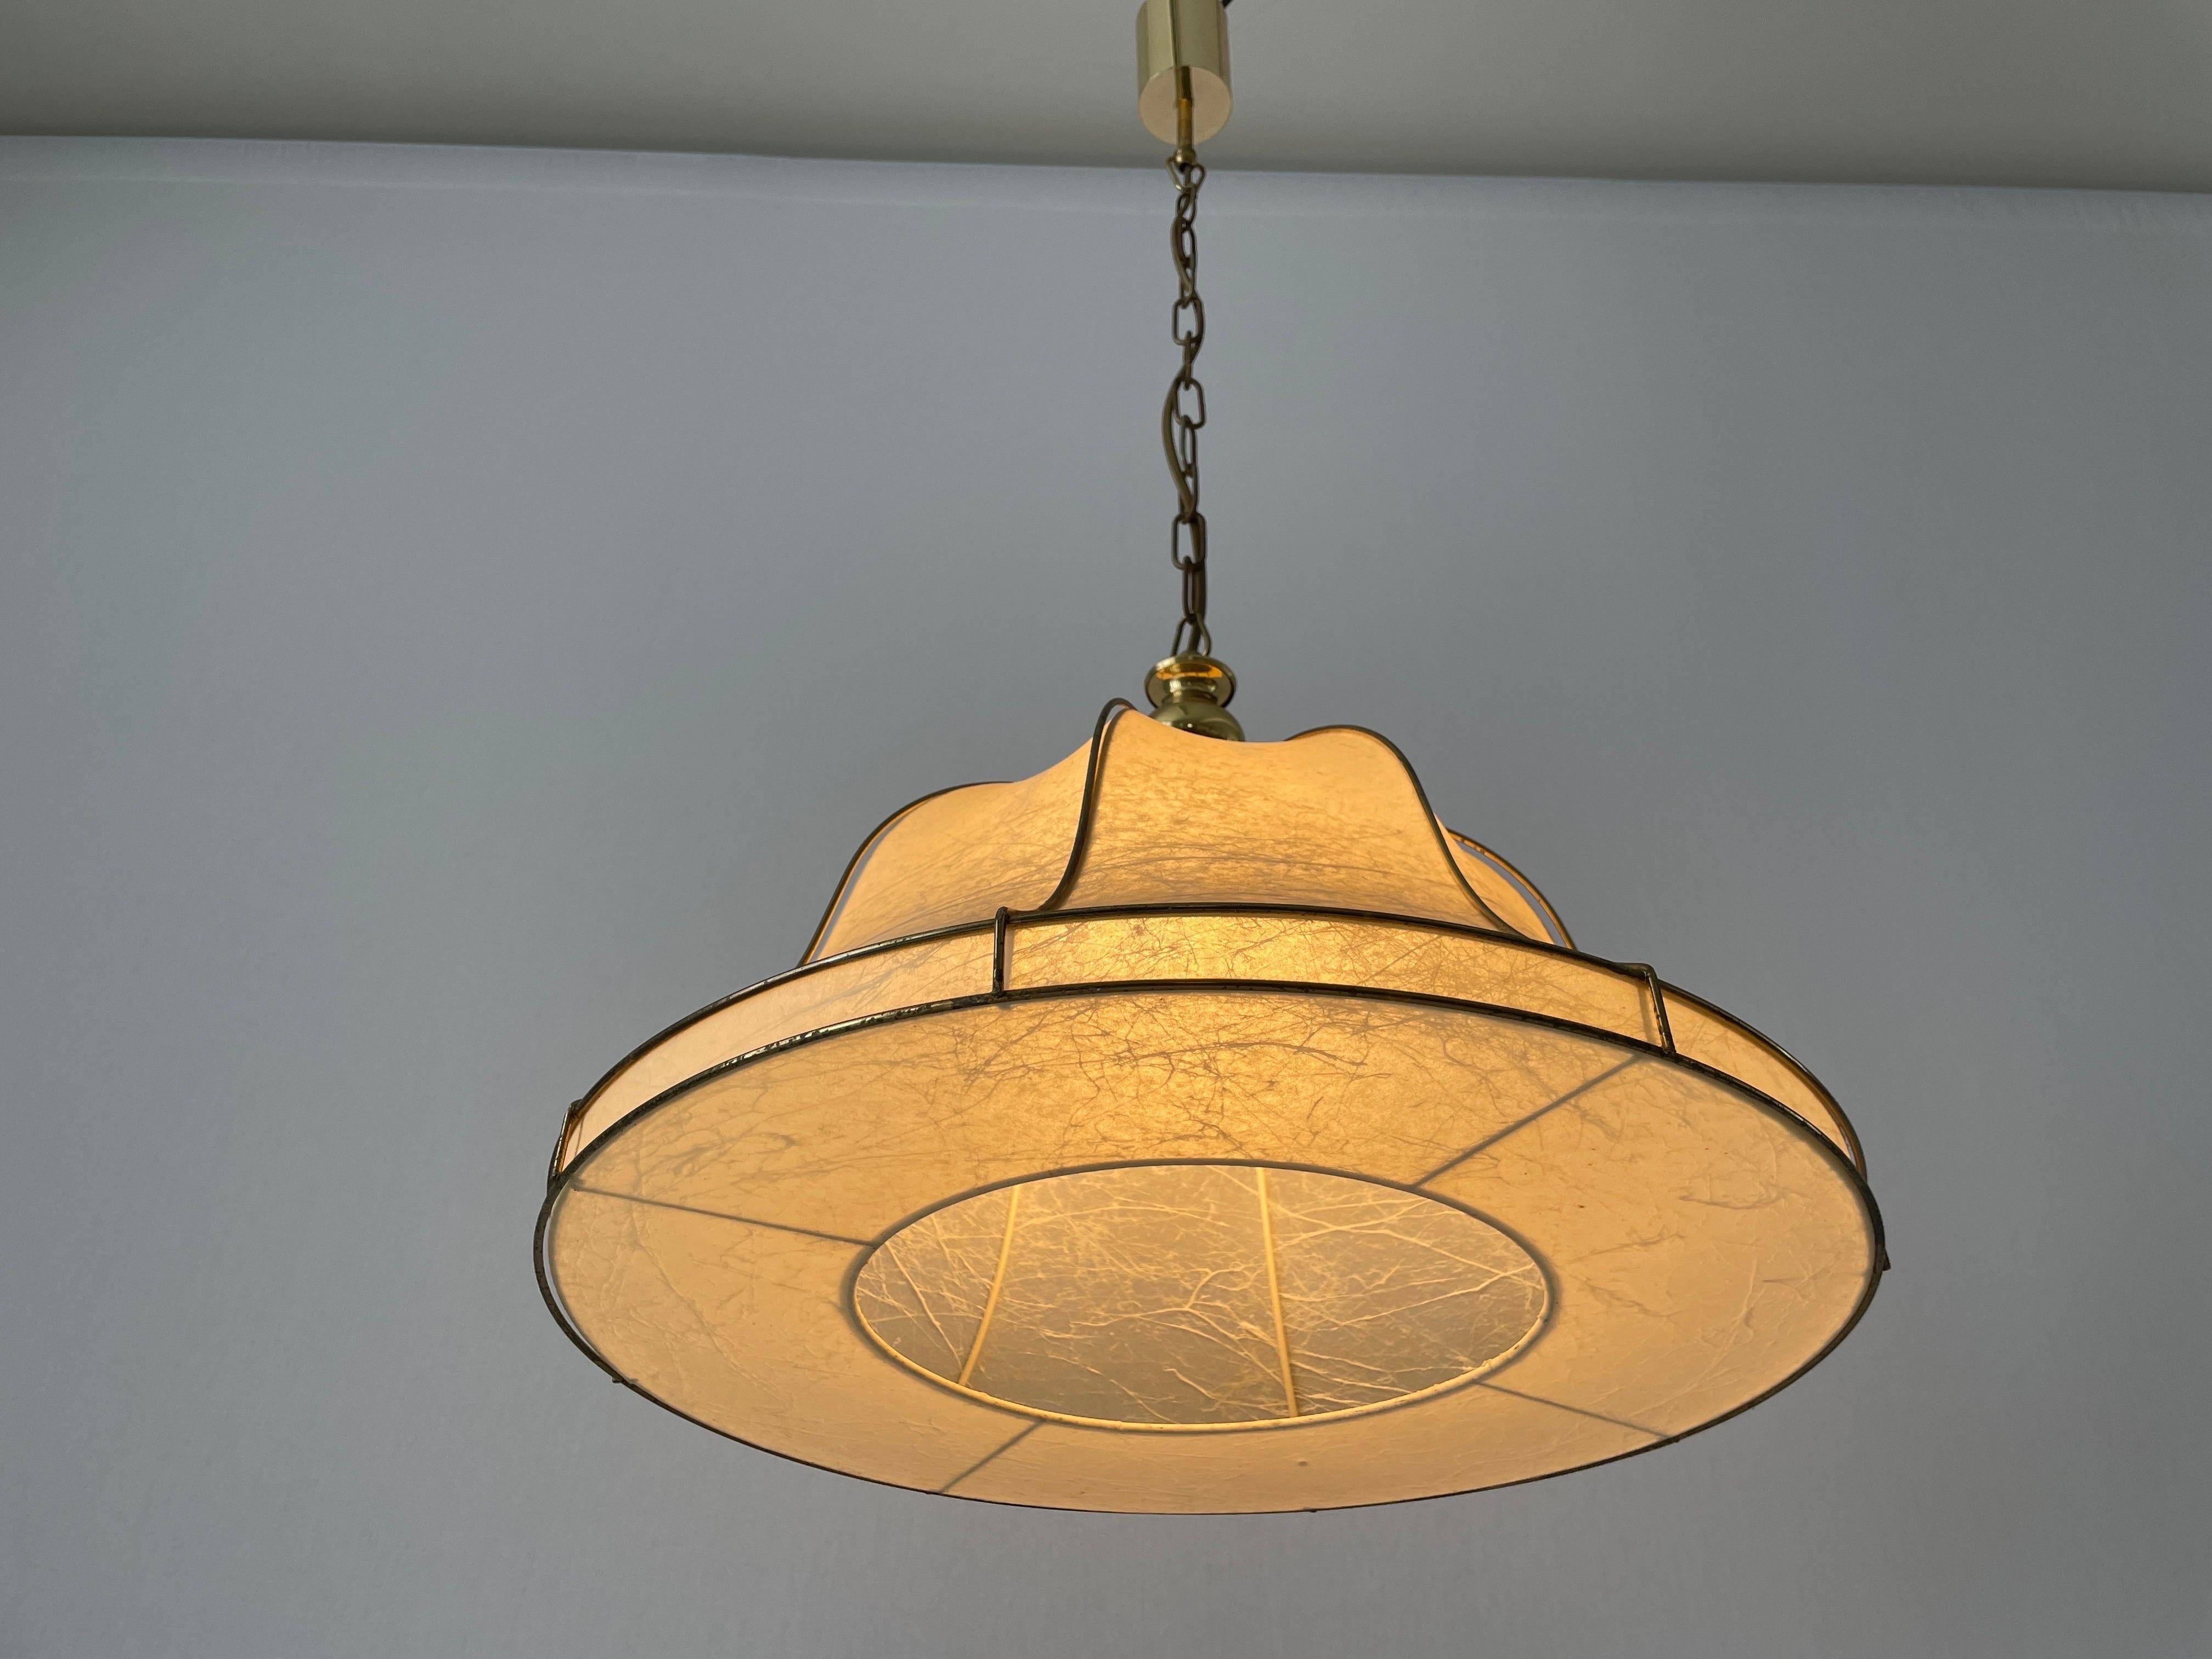 Cocoon Pendant Lamp with Gold Metal Shade Frame by Goldkant, 1960s, Germany For Sale 8